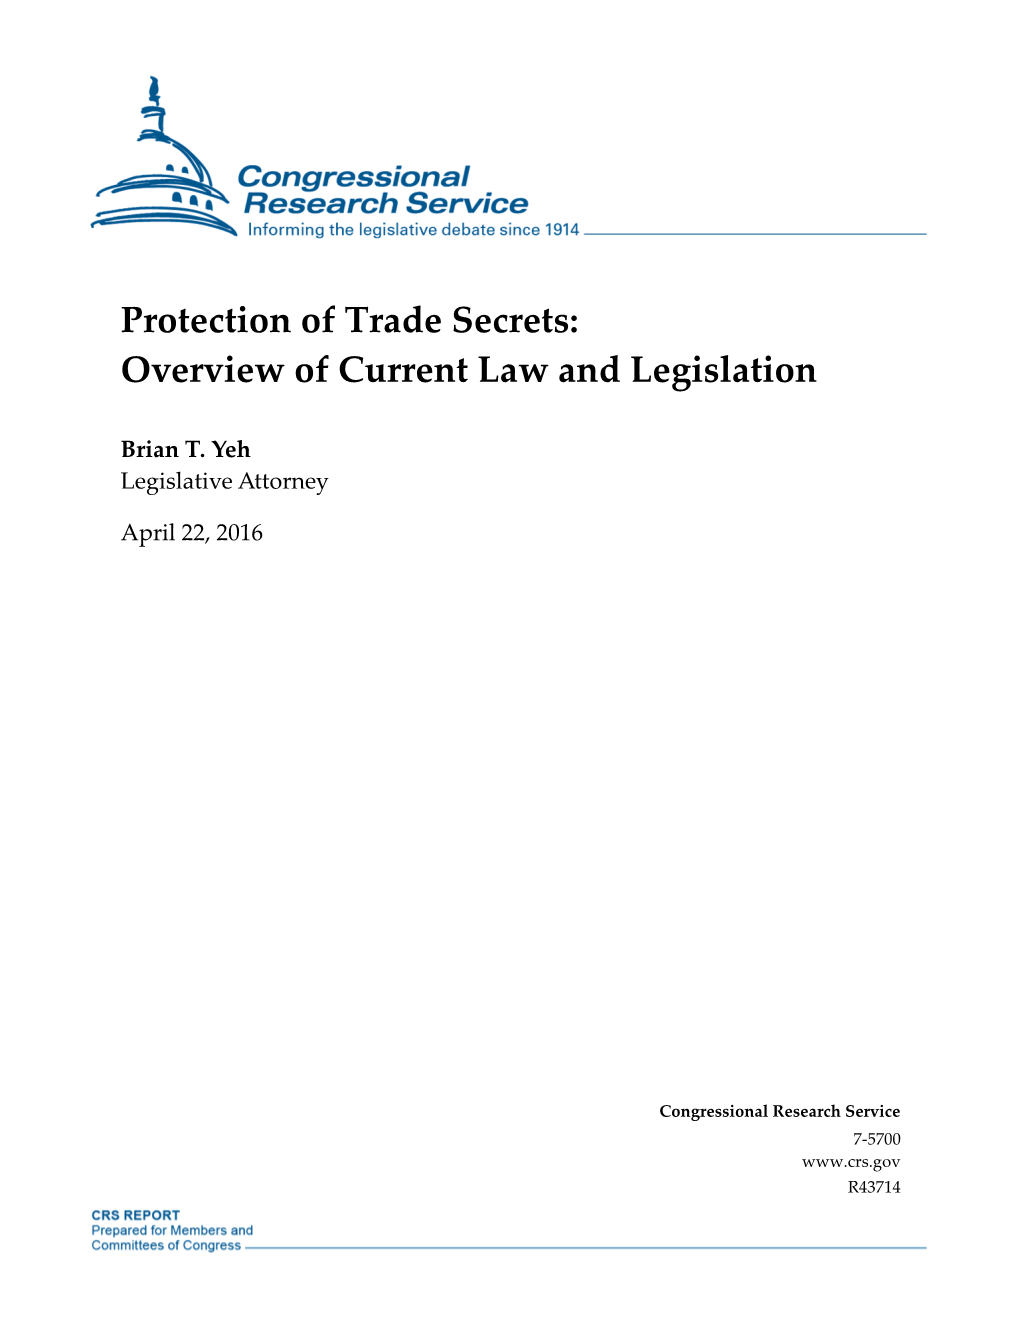 Protection of Trade Secrets: Overview of Current Law and Legislation